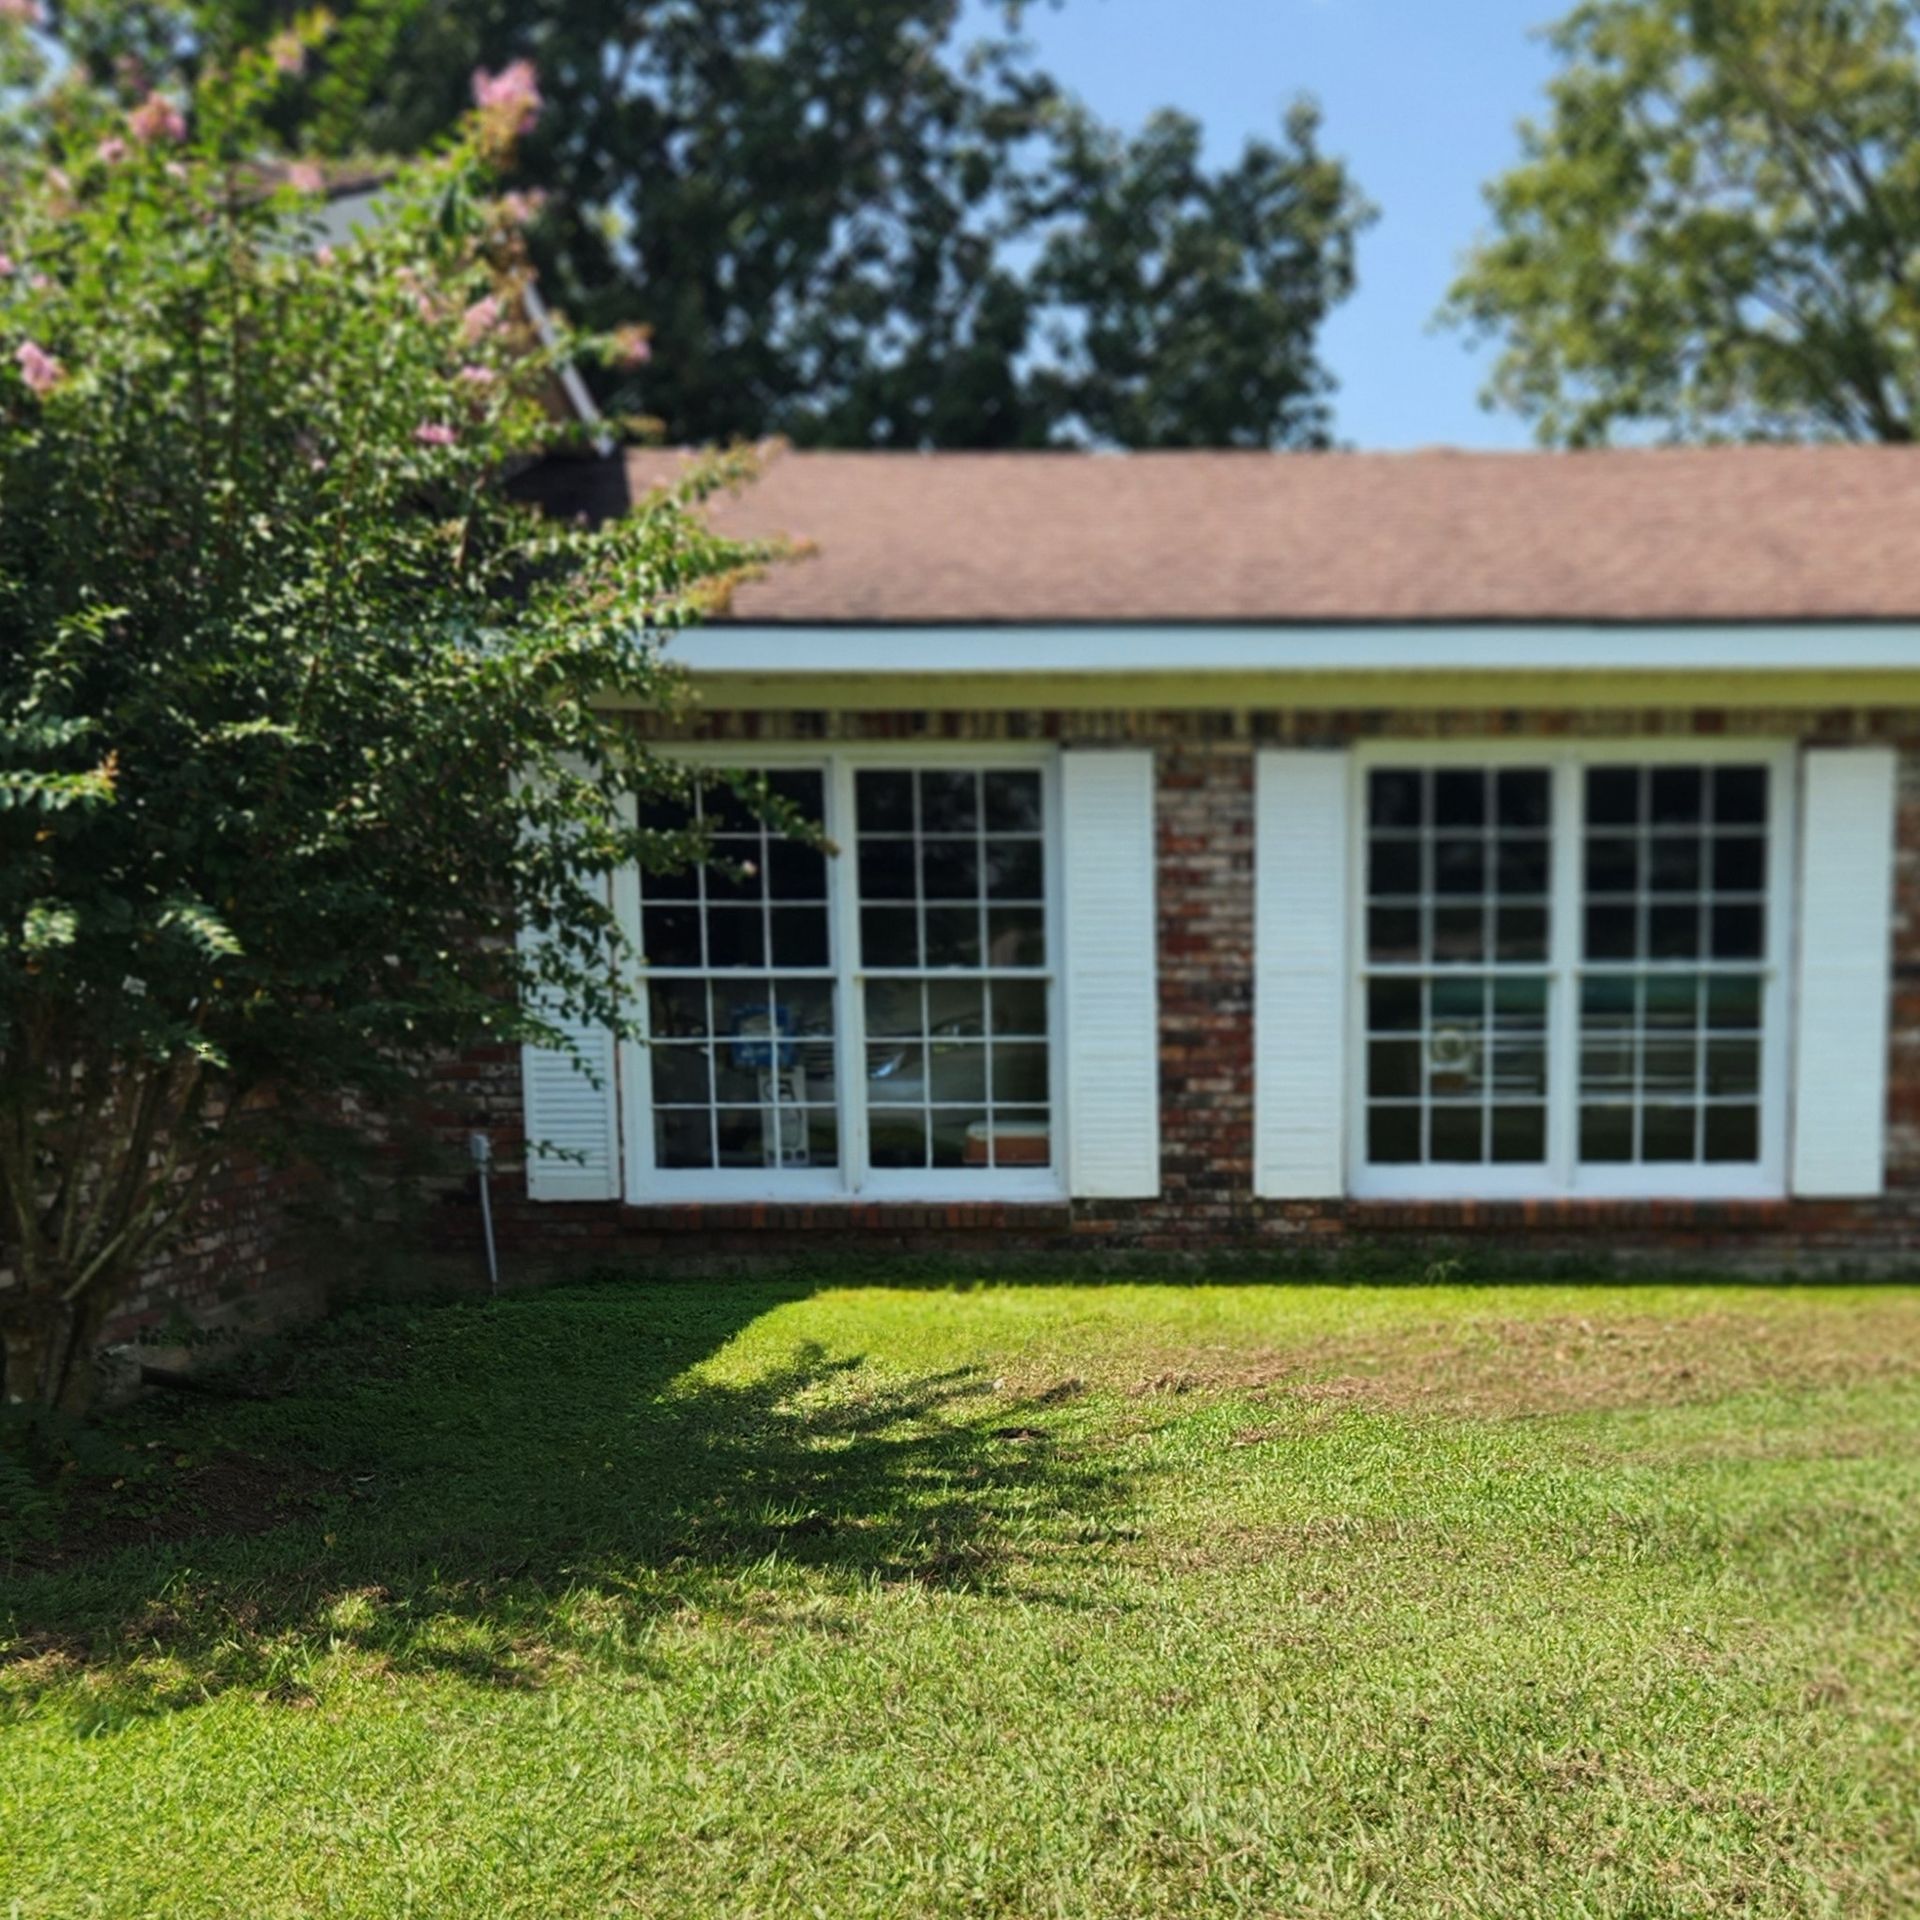 SPF Ultimate Security window film protects home windows from attempted break-in entry in Montgomery AL